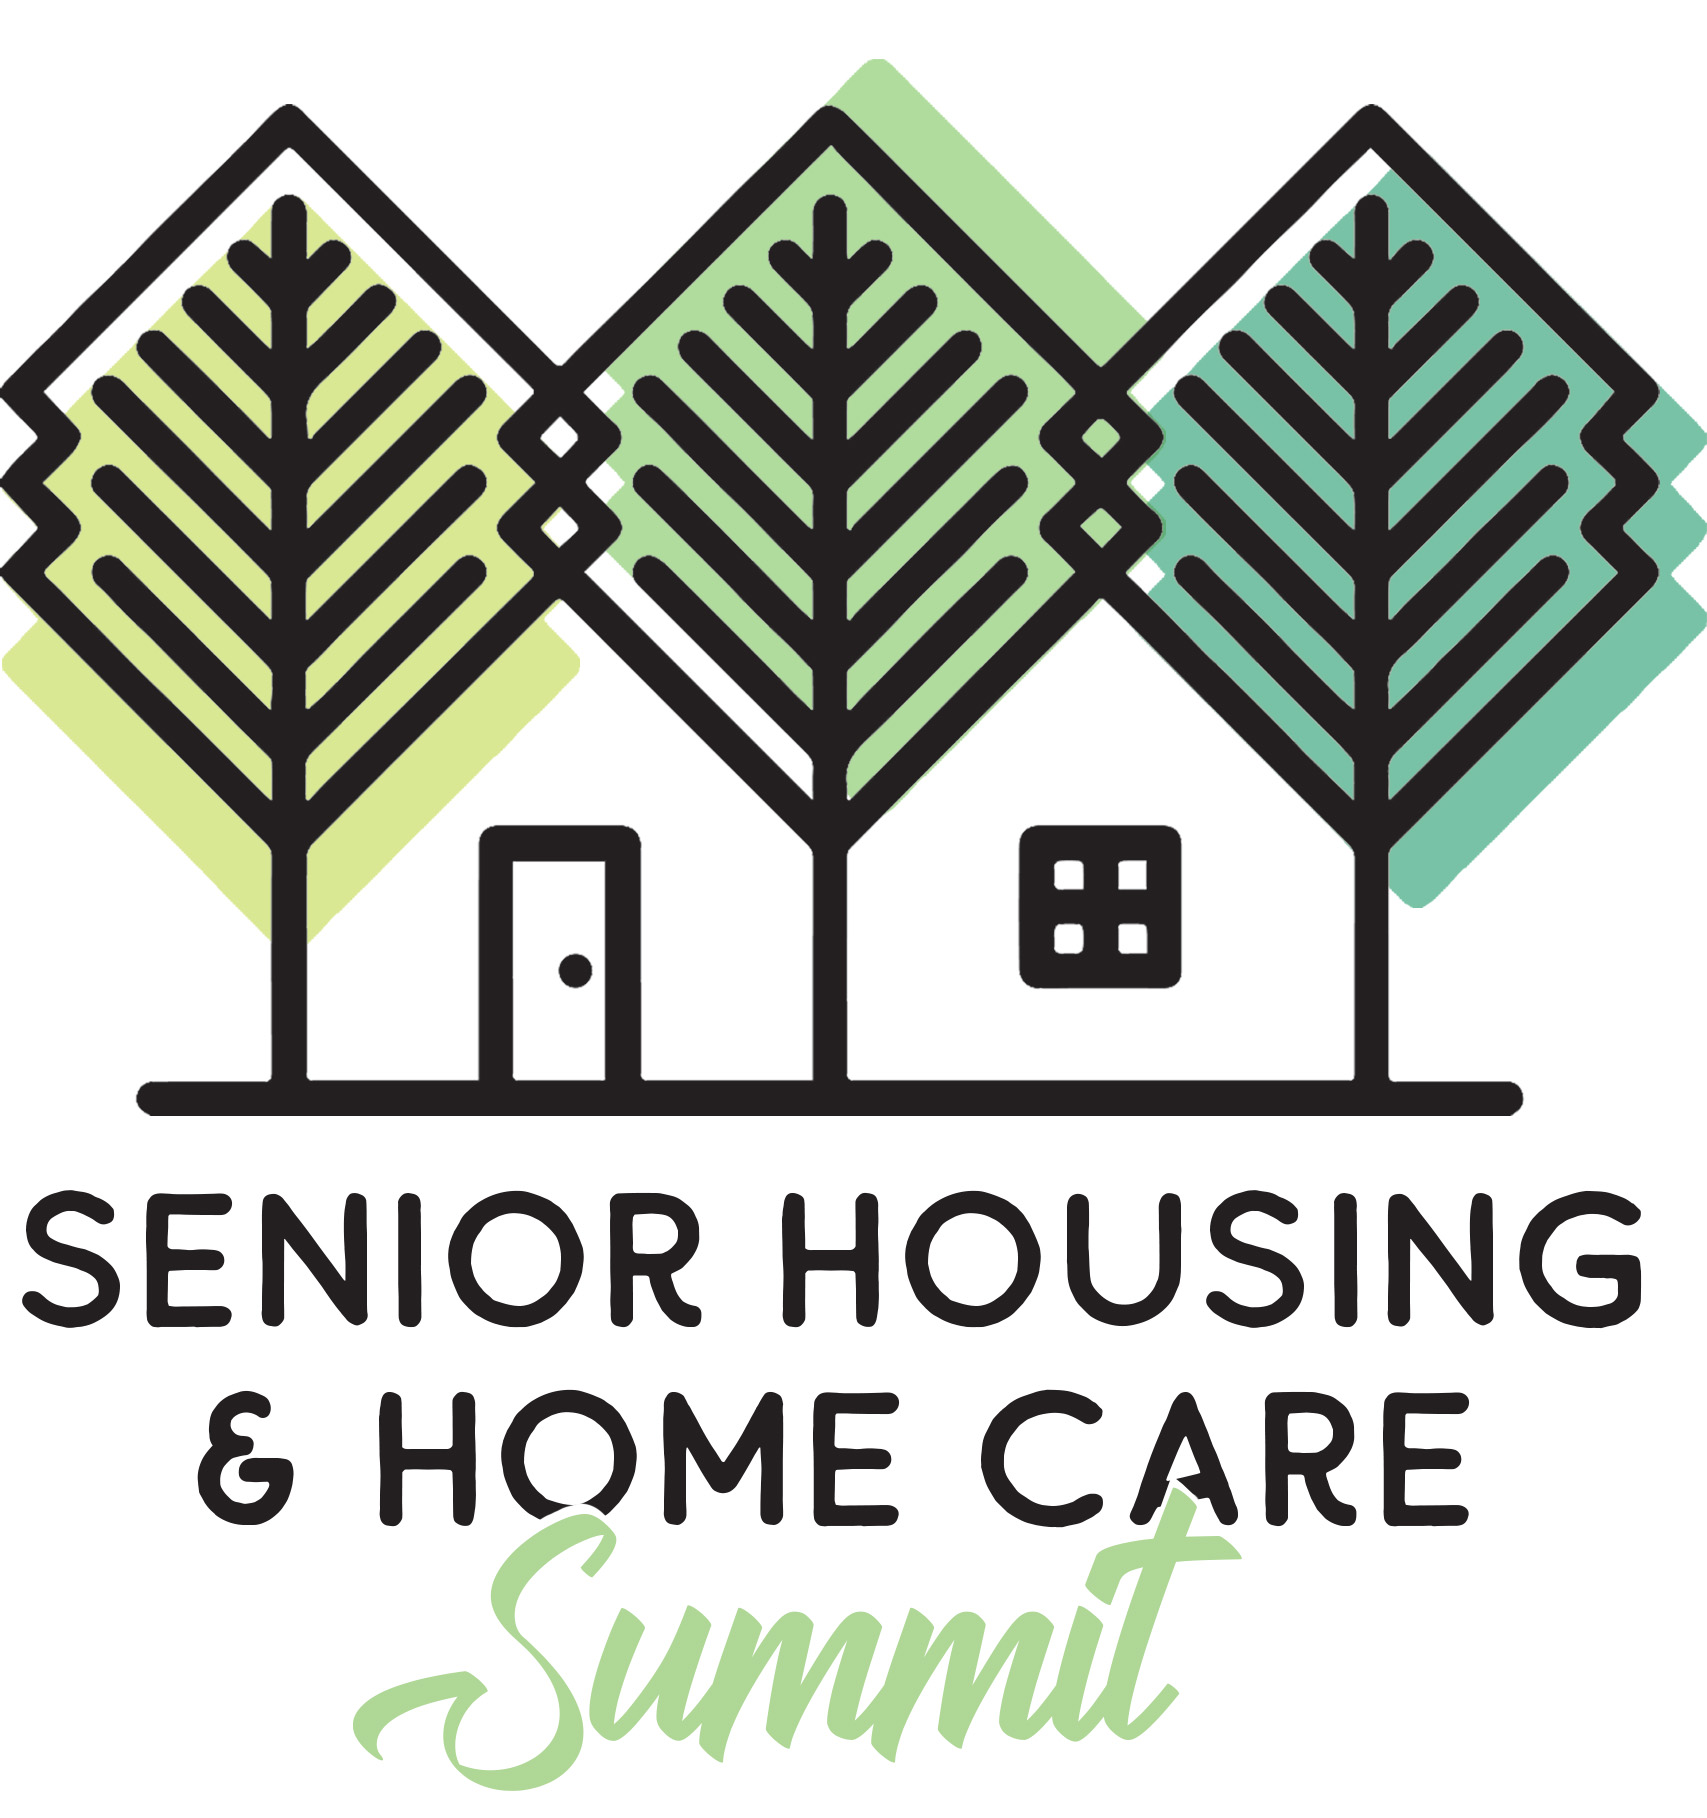 2019 Senior Housing and Home Care Summit